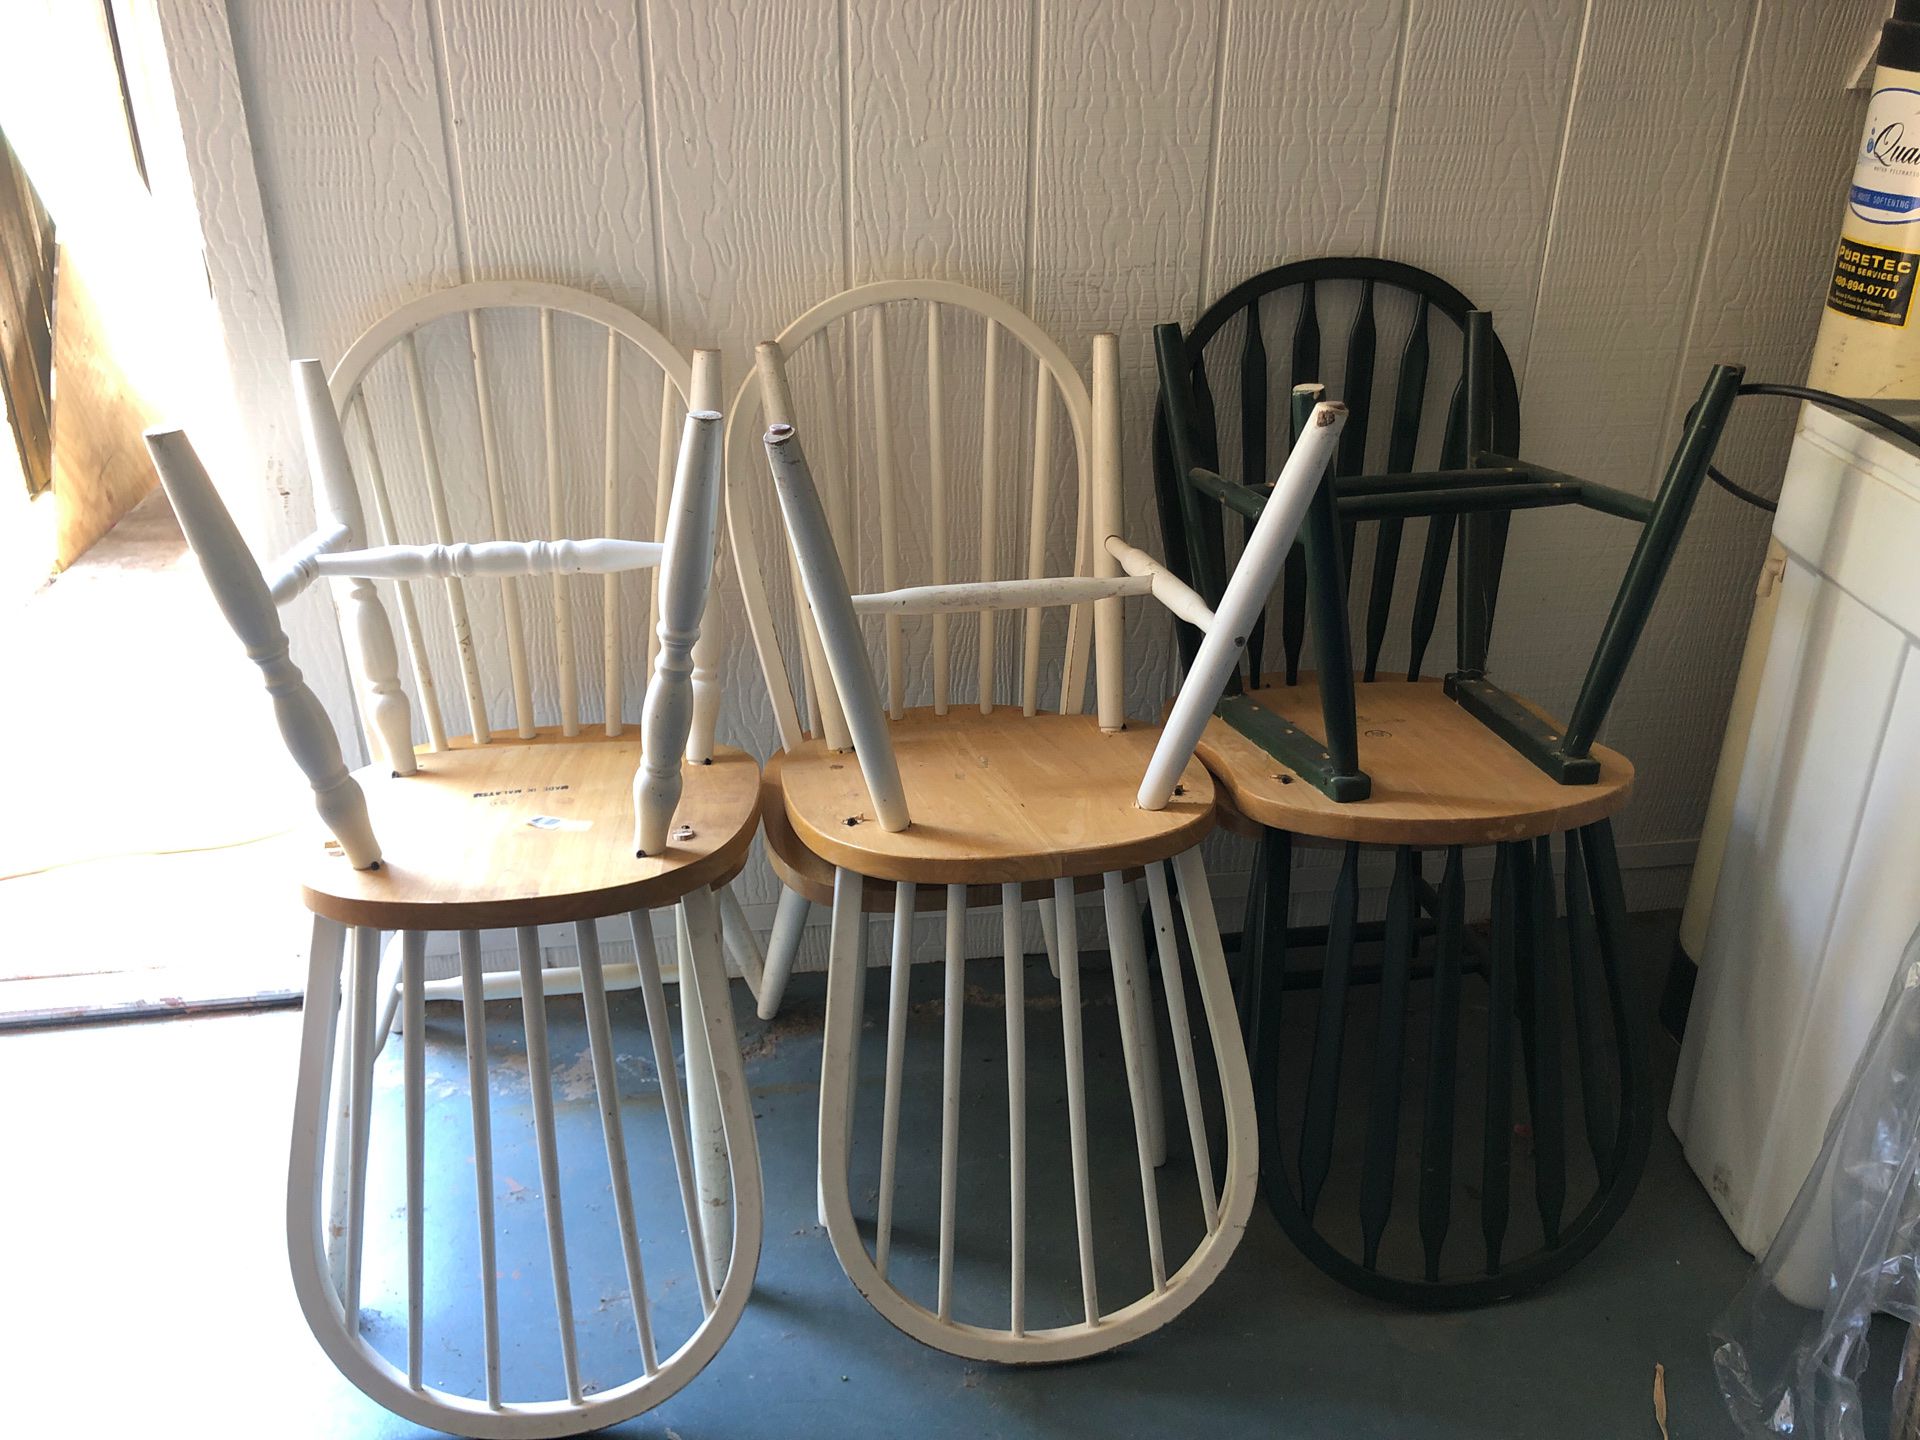 Dining room chairs-25 for all or 5 each.